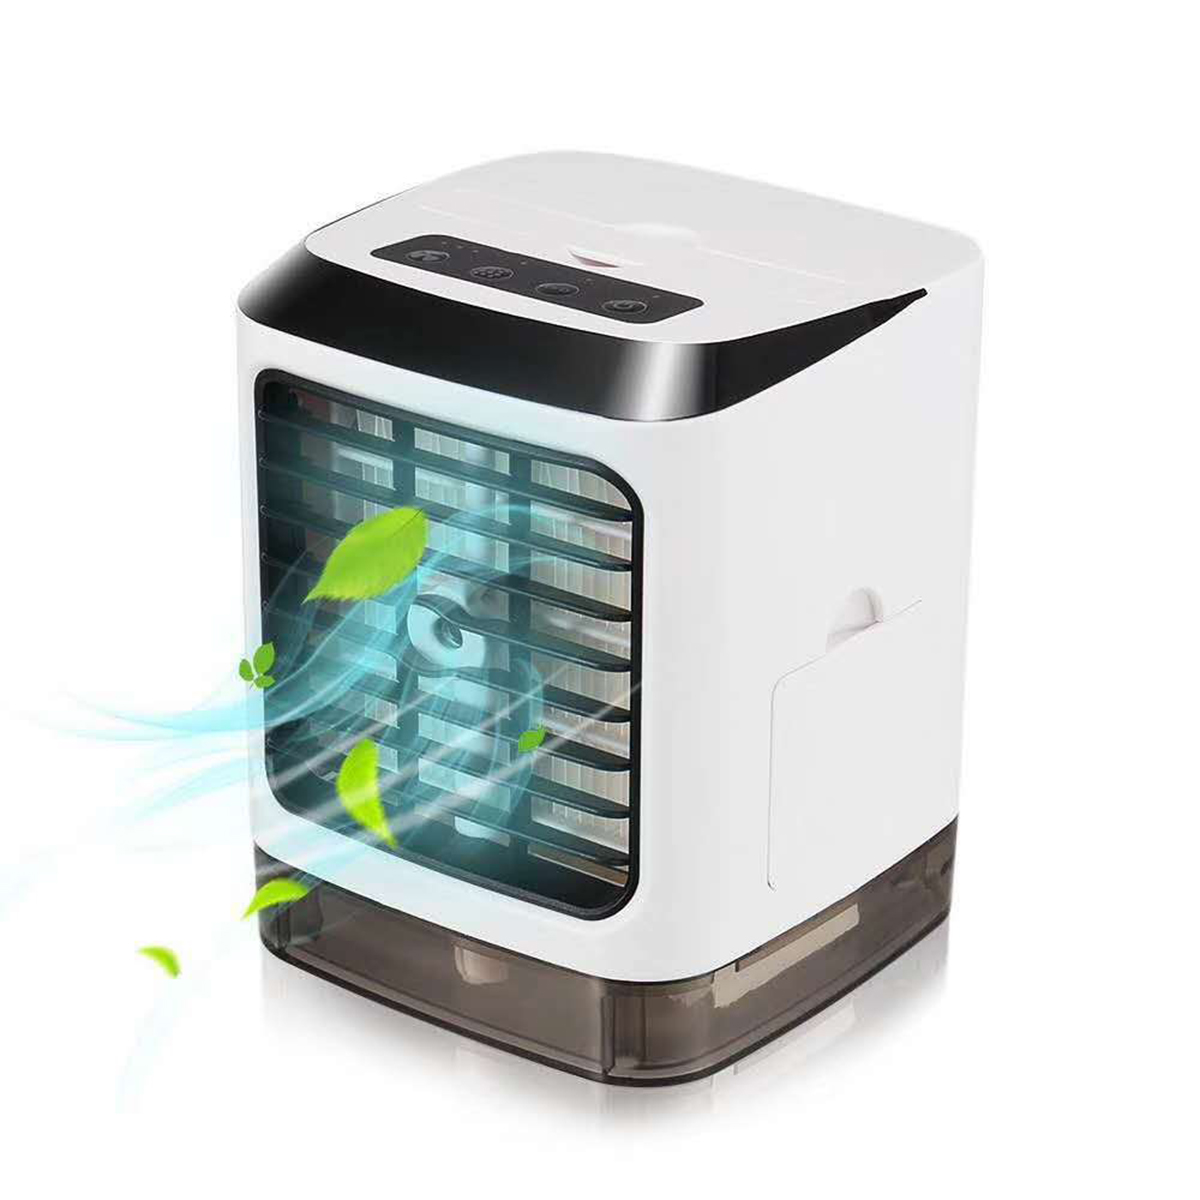 

2A 5V 6-15W LED Personal Air Cooler Humidifier USB Mini Portable Air Conditioner Fan Desktop Space Cooler